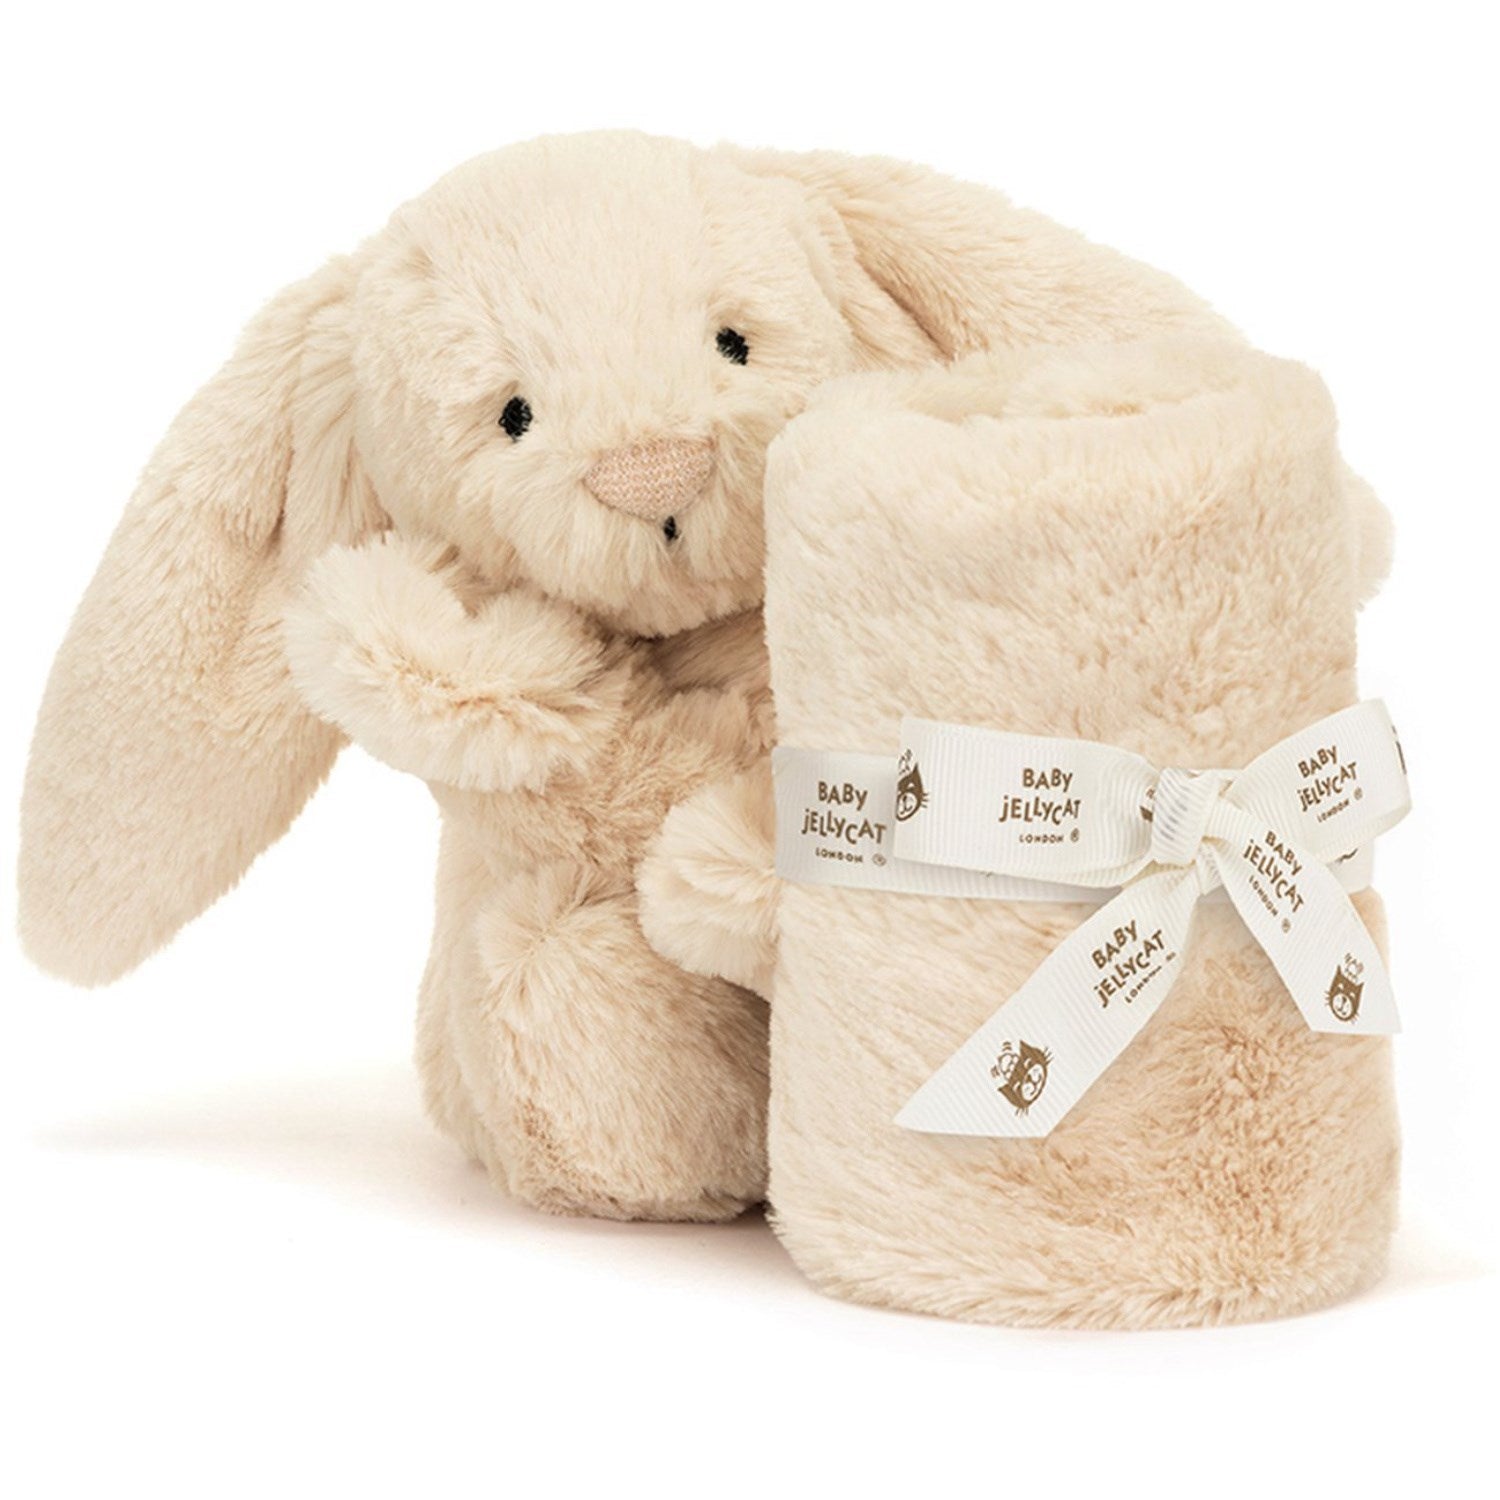   Bashful Luxe Bunny Willow Soother 6